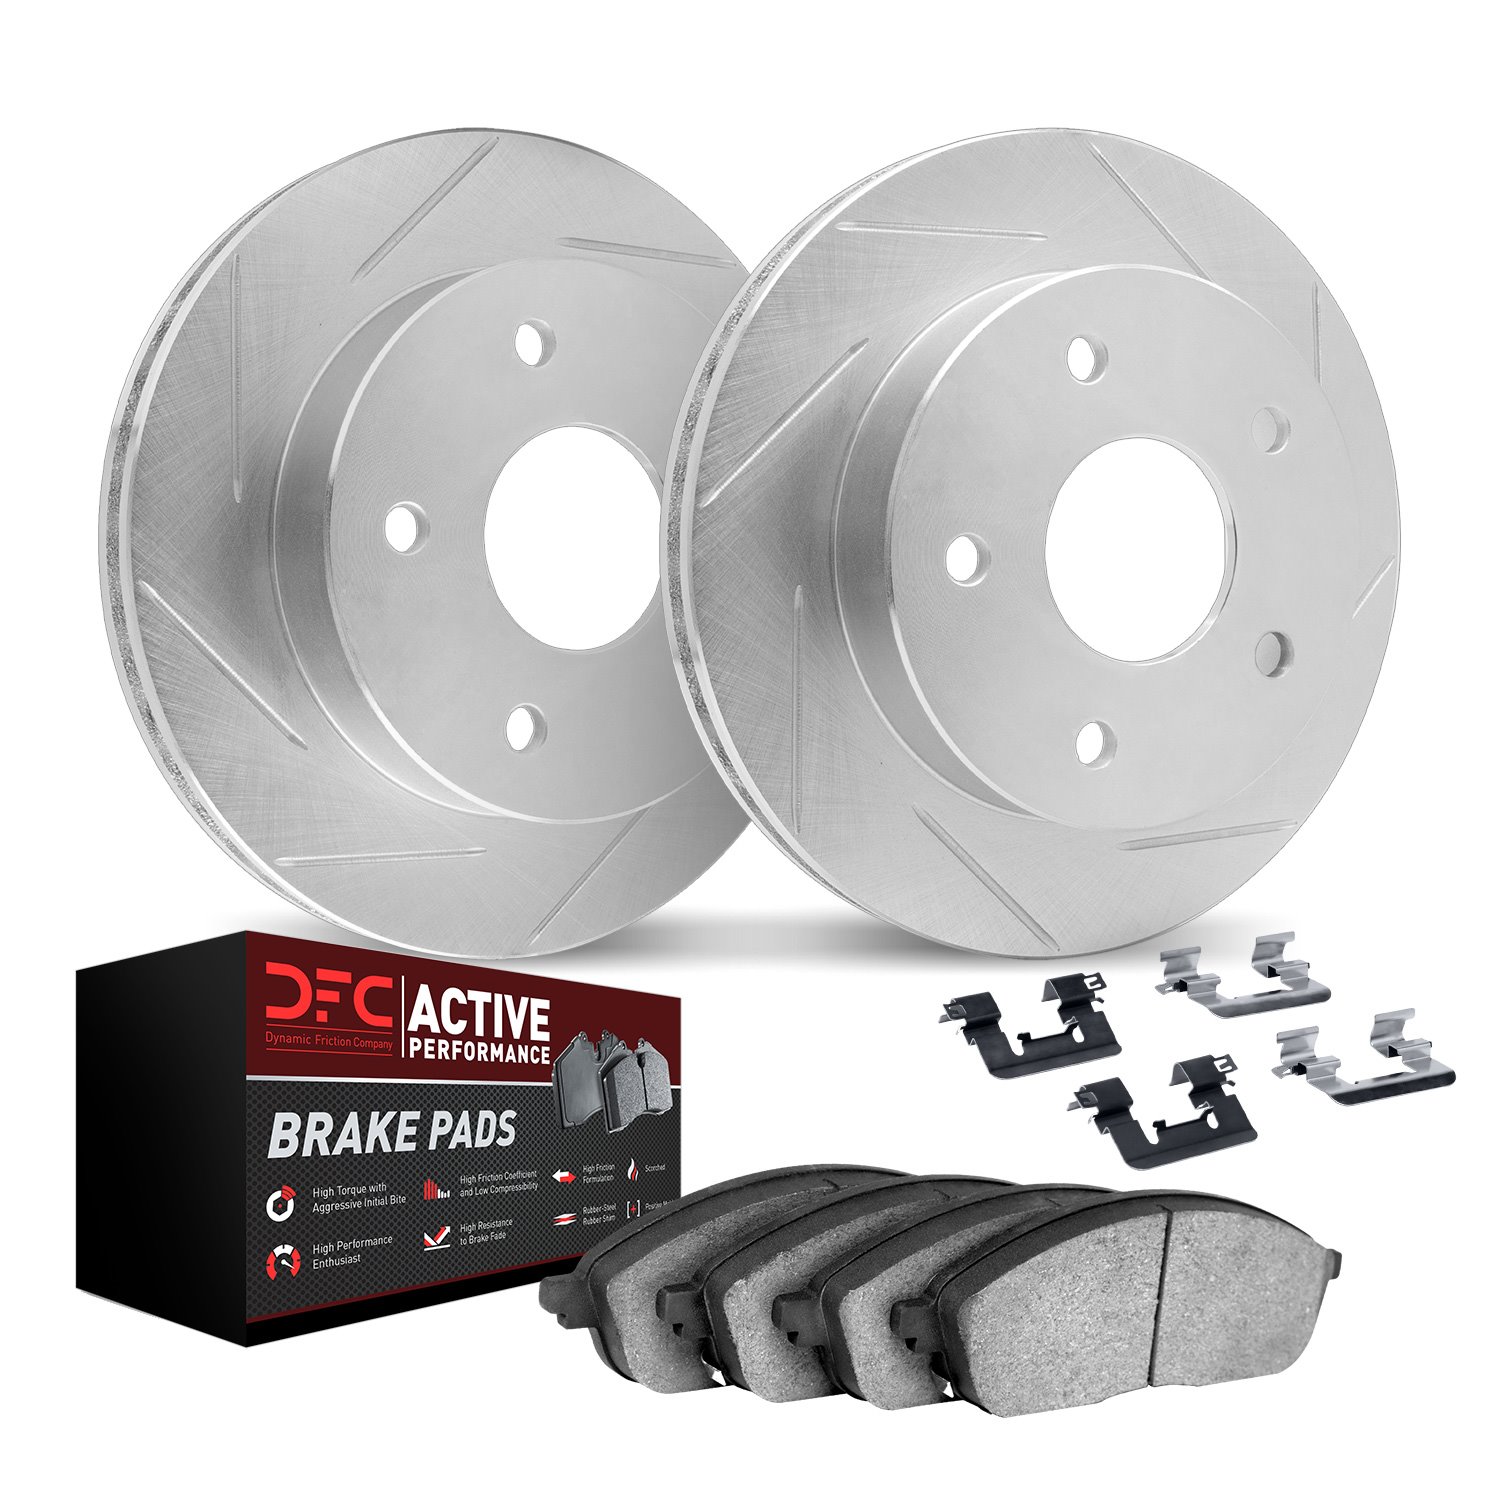 2712-13073 Geoperformance Slotted Brake Rotors with Active Performance Pads Kits & Hardware, Fits Select Multiple Makes/Models,